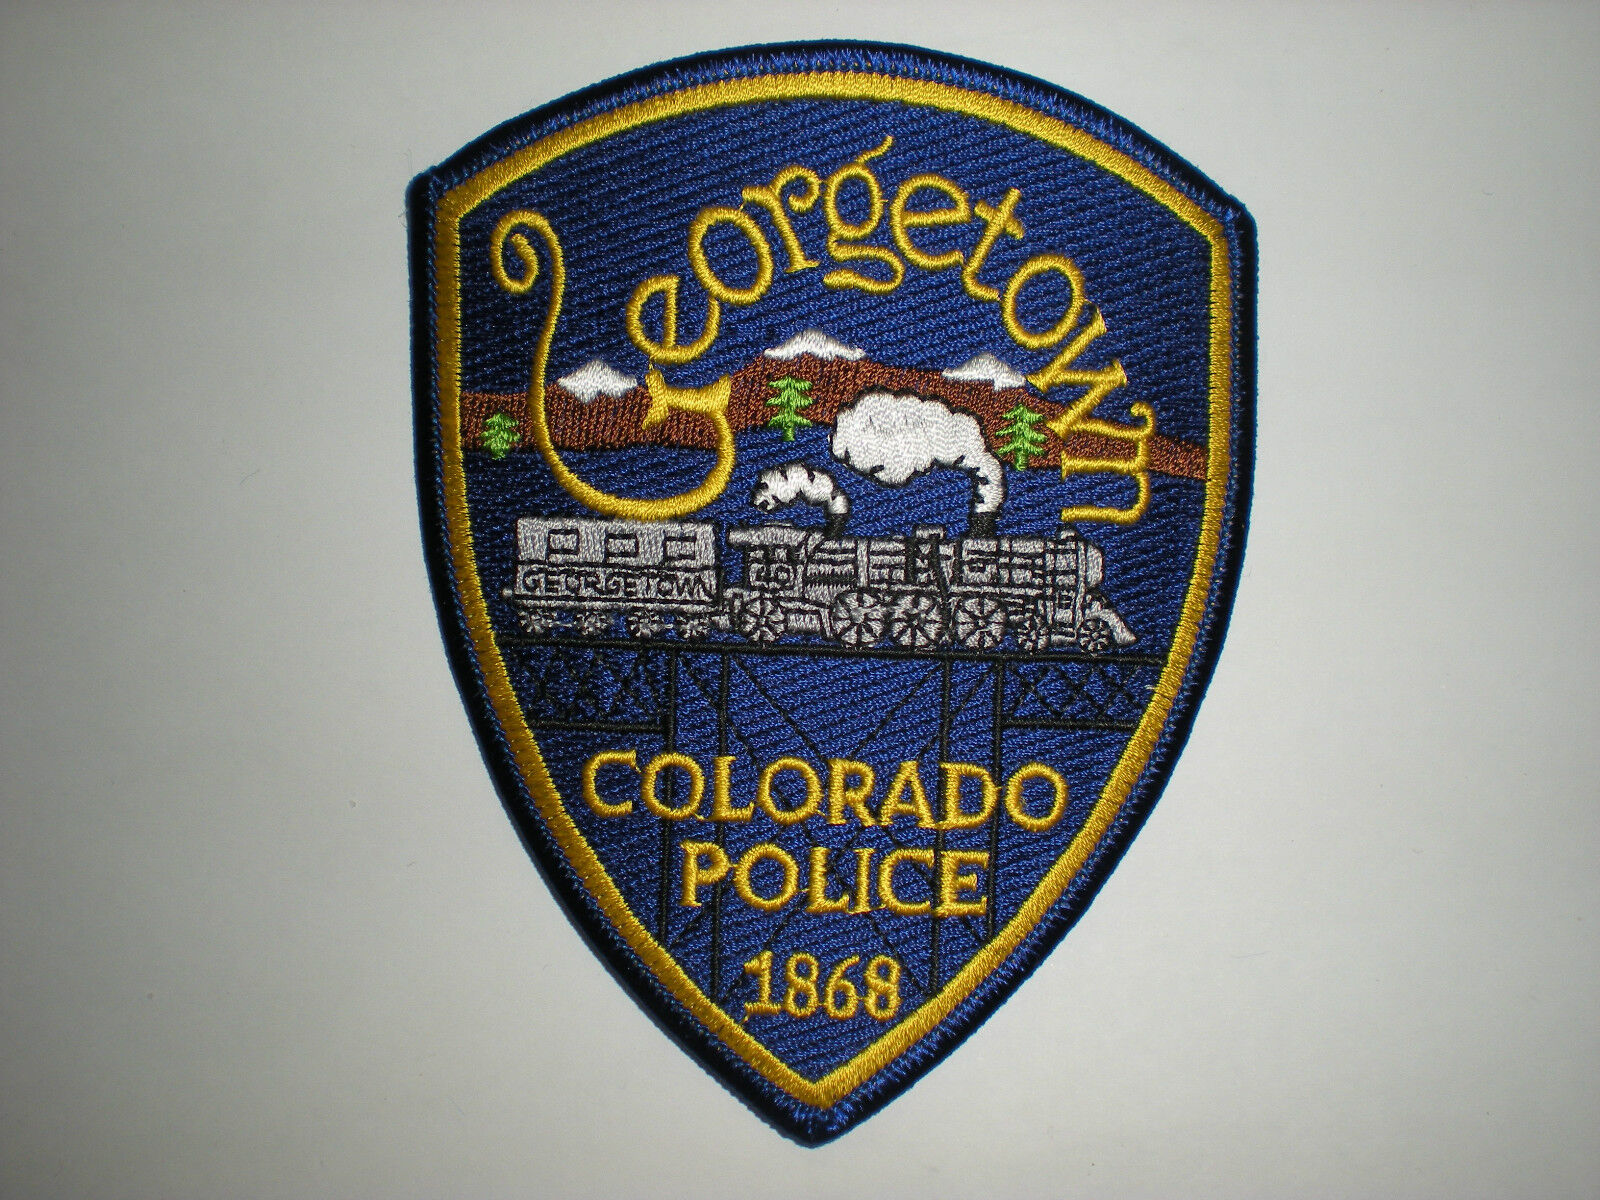 GEORGETOWN, COLORADO POLICE DEPARTMENT PATCH